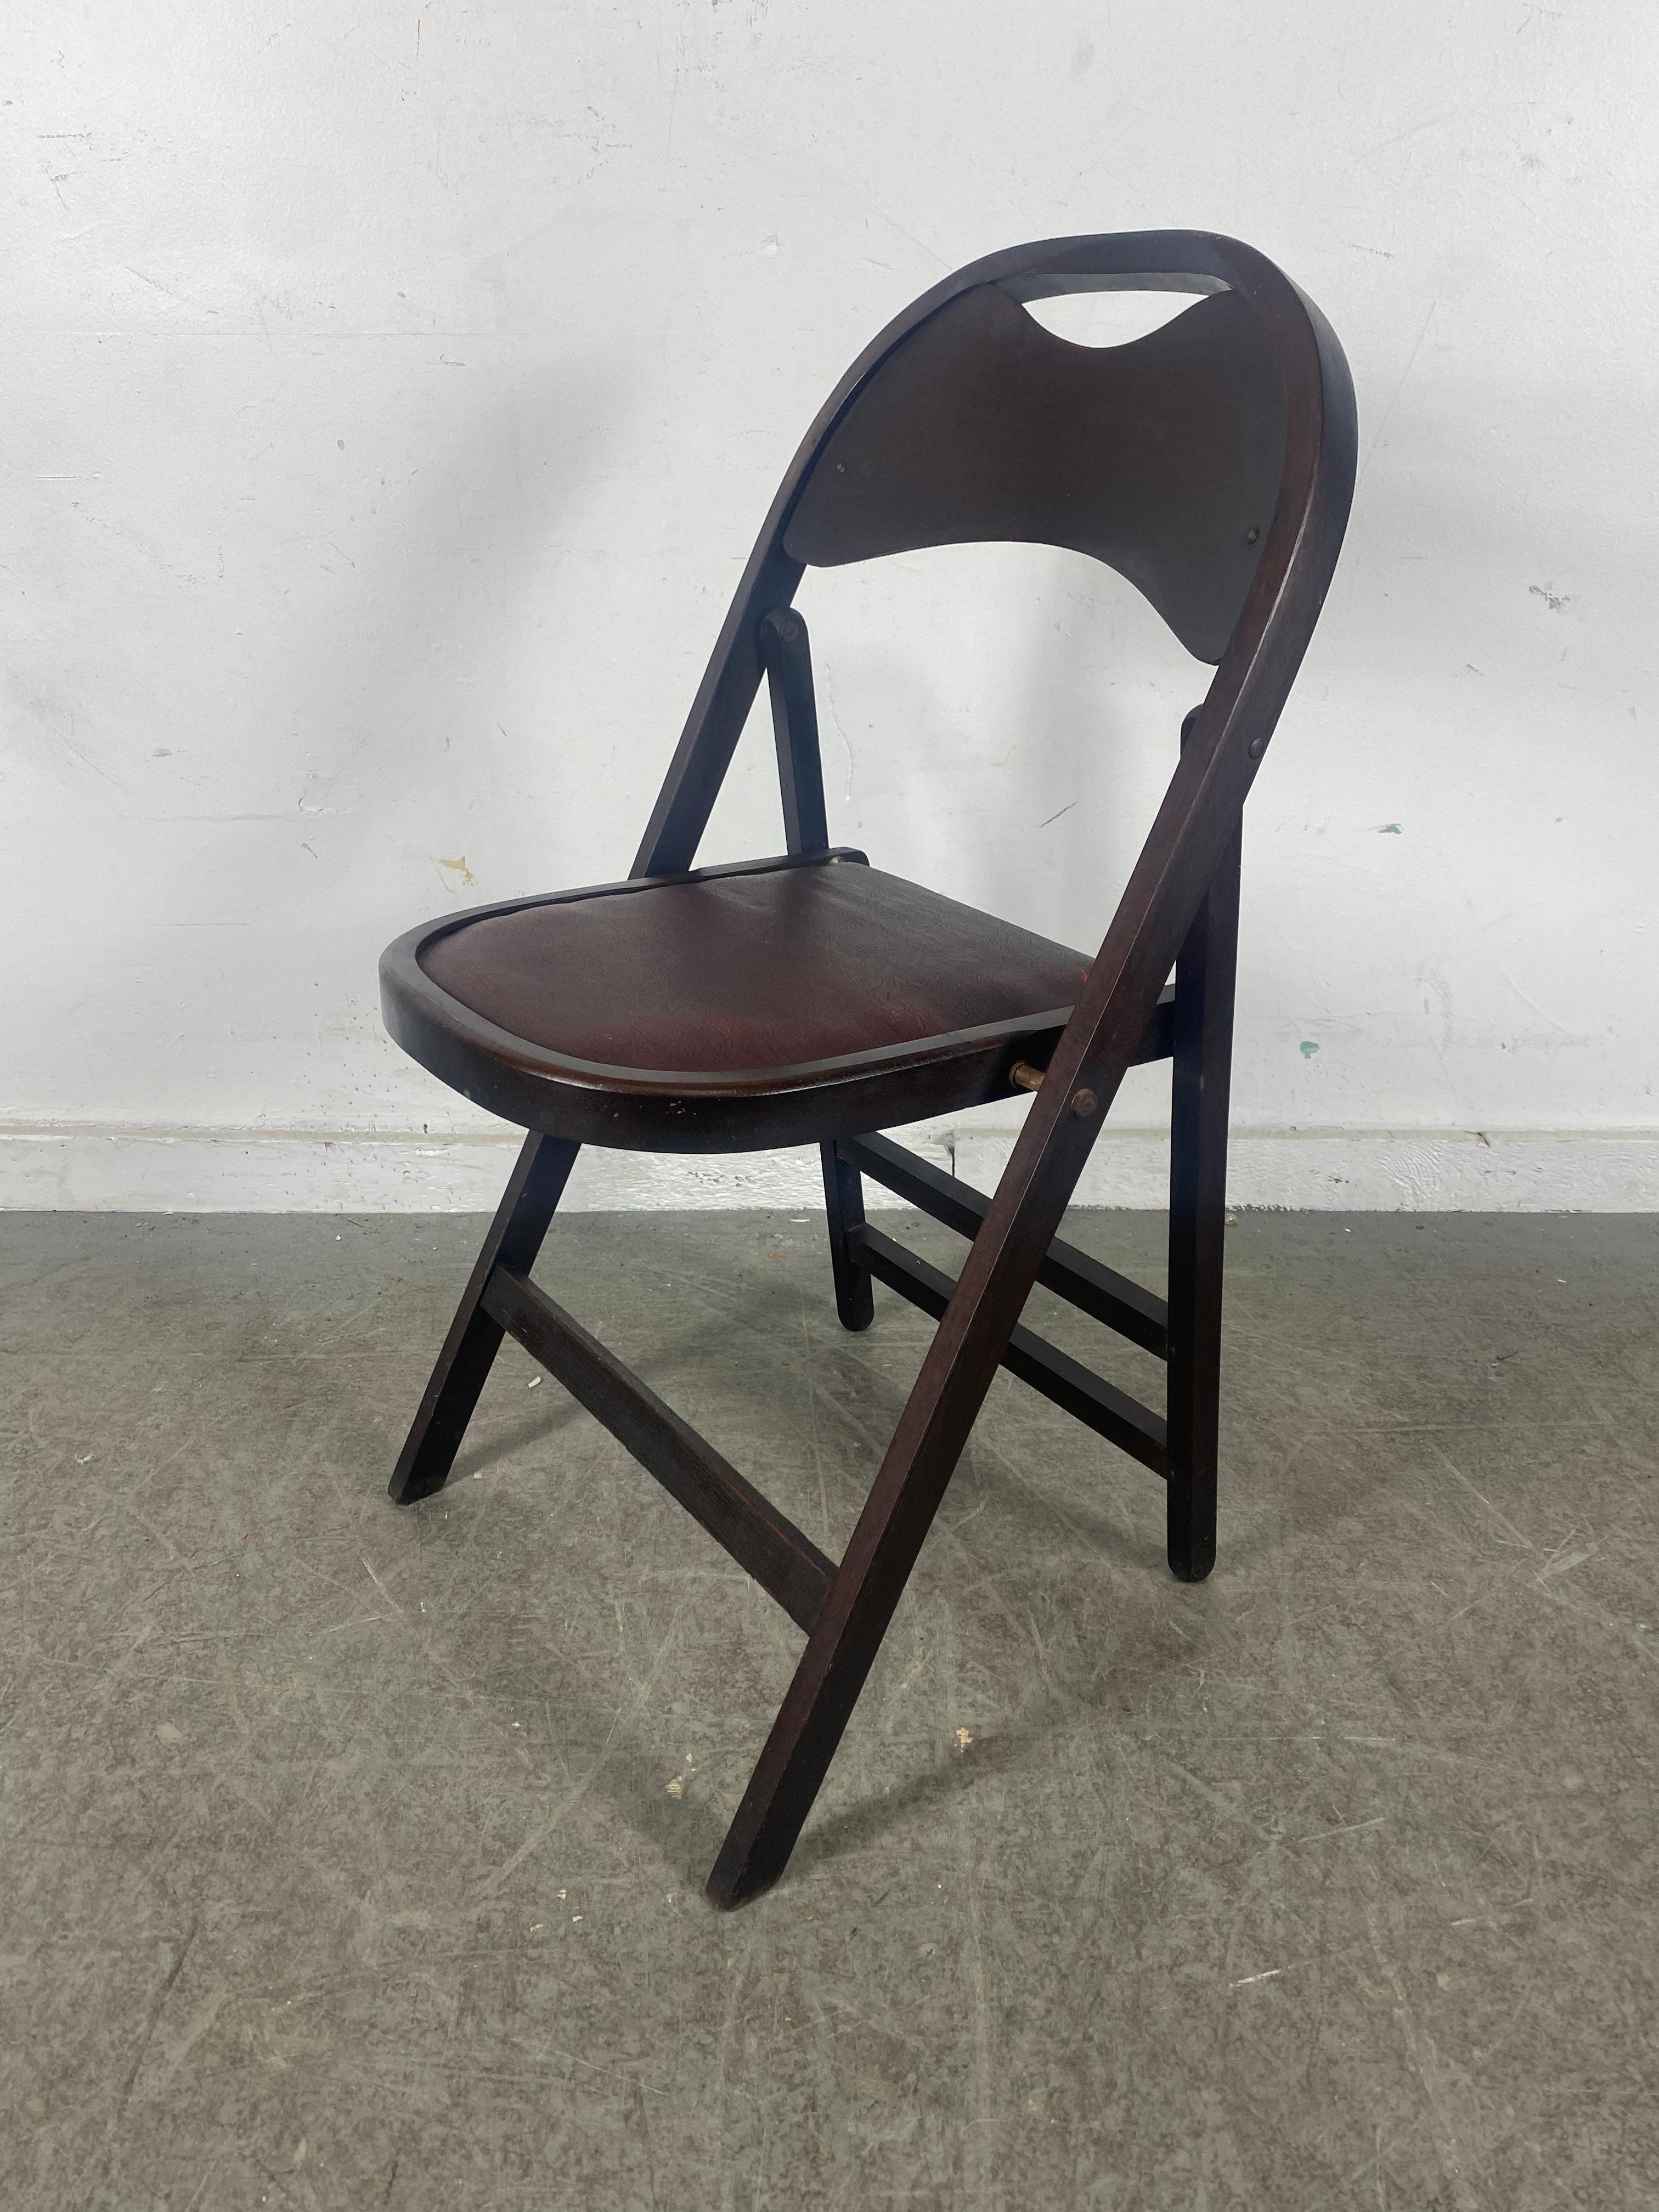 American Set 4 Classic Bauhaus Thonet Style Folding Chairs manufactured by Stakmore For Sale